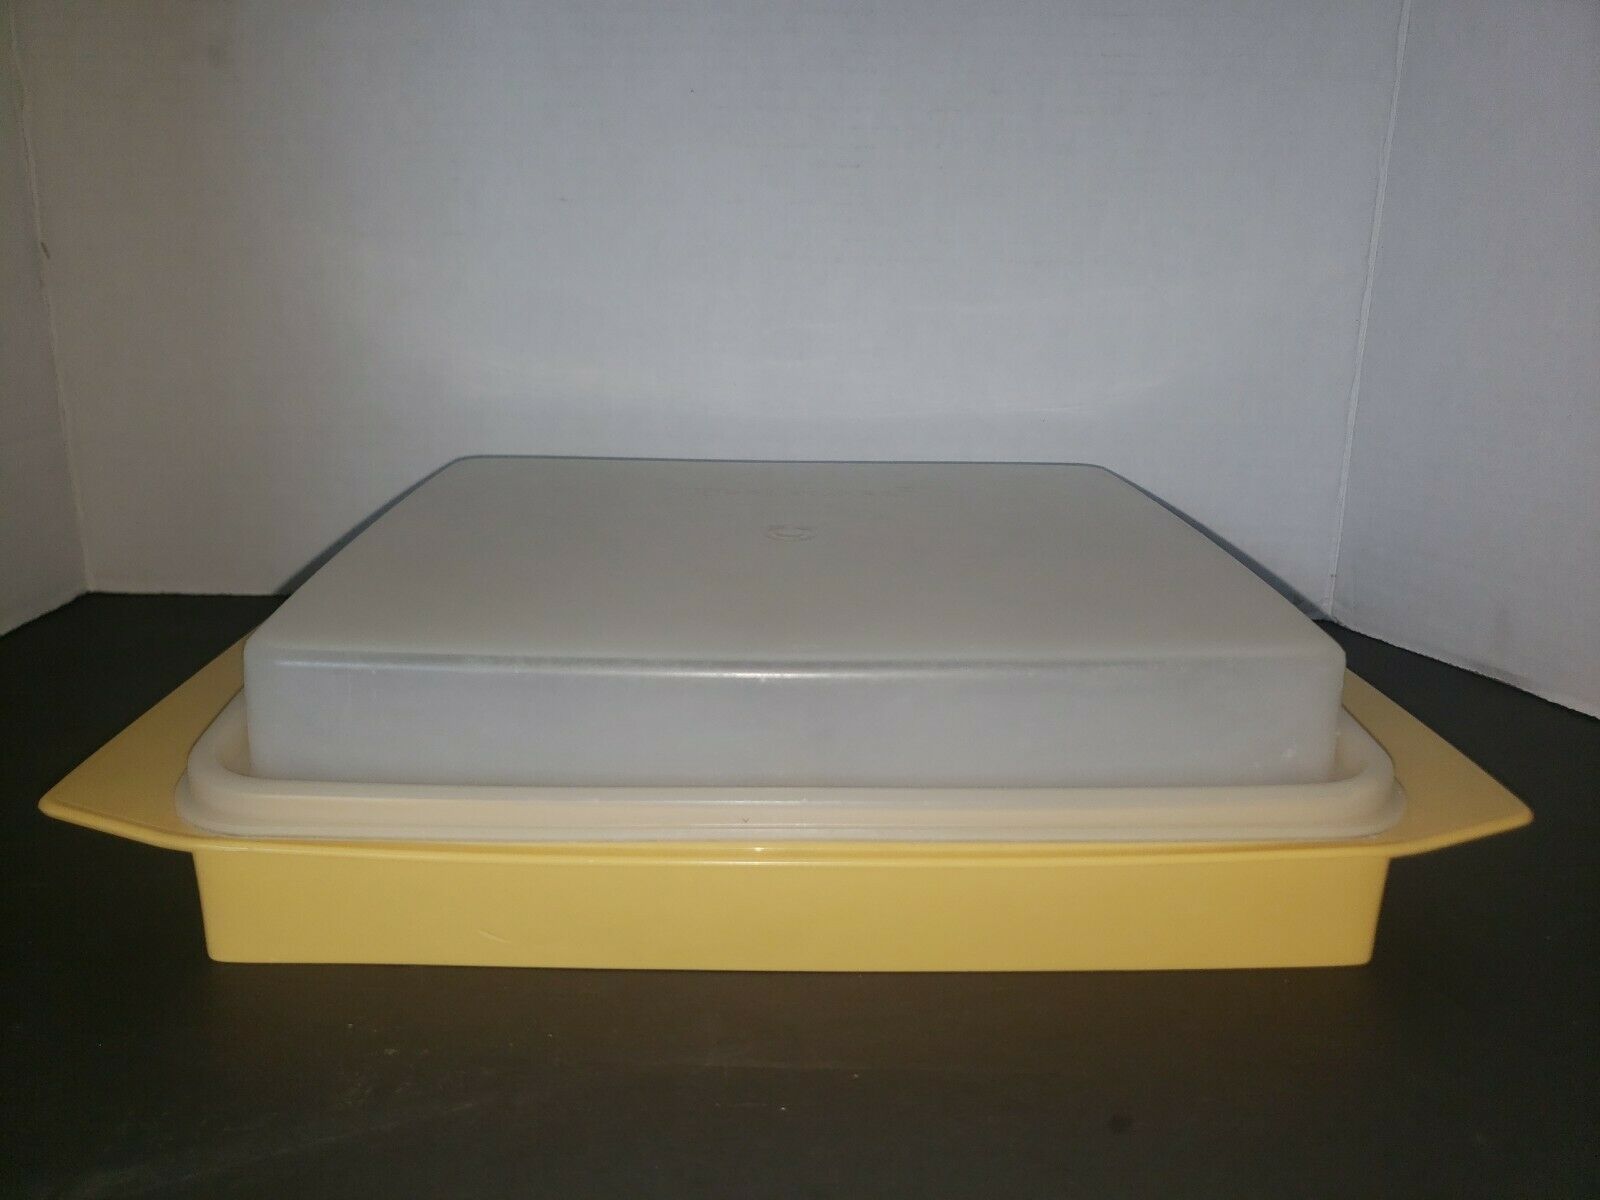 Vintage Tall Tupperware Cereal Storage Container Keepers